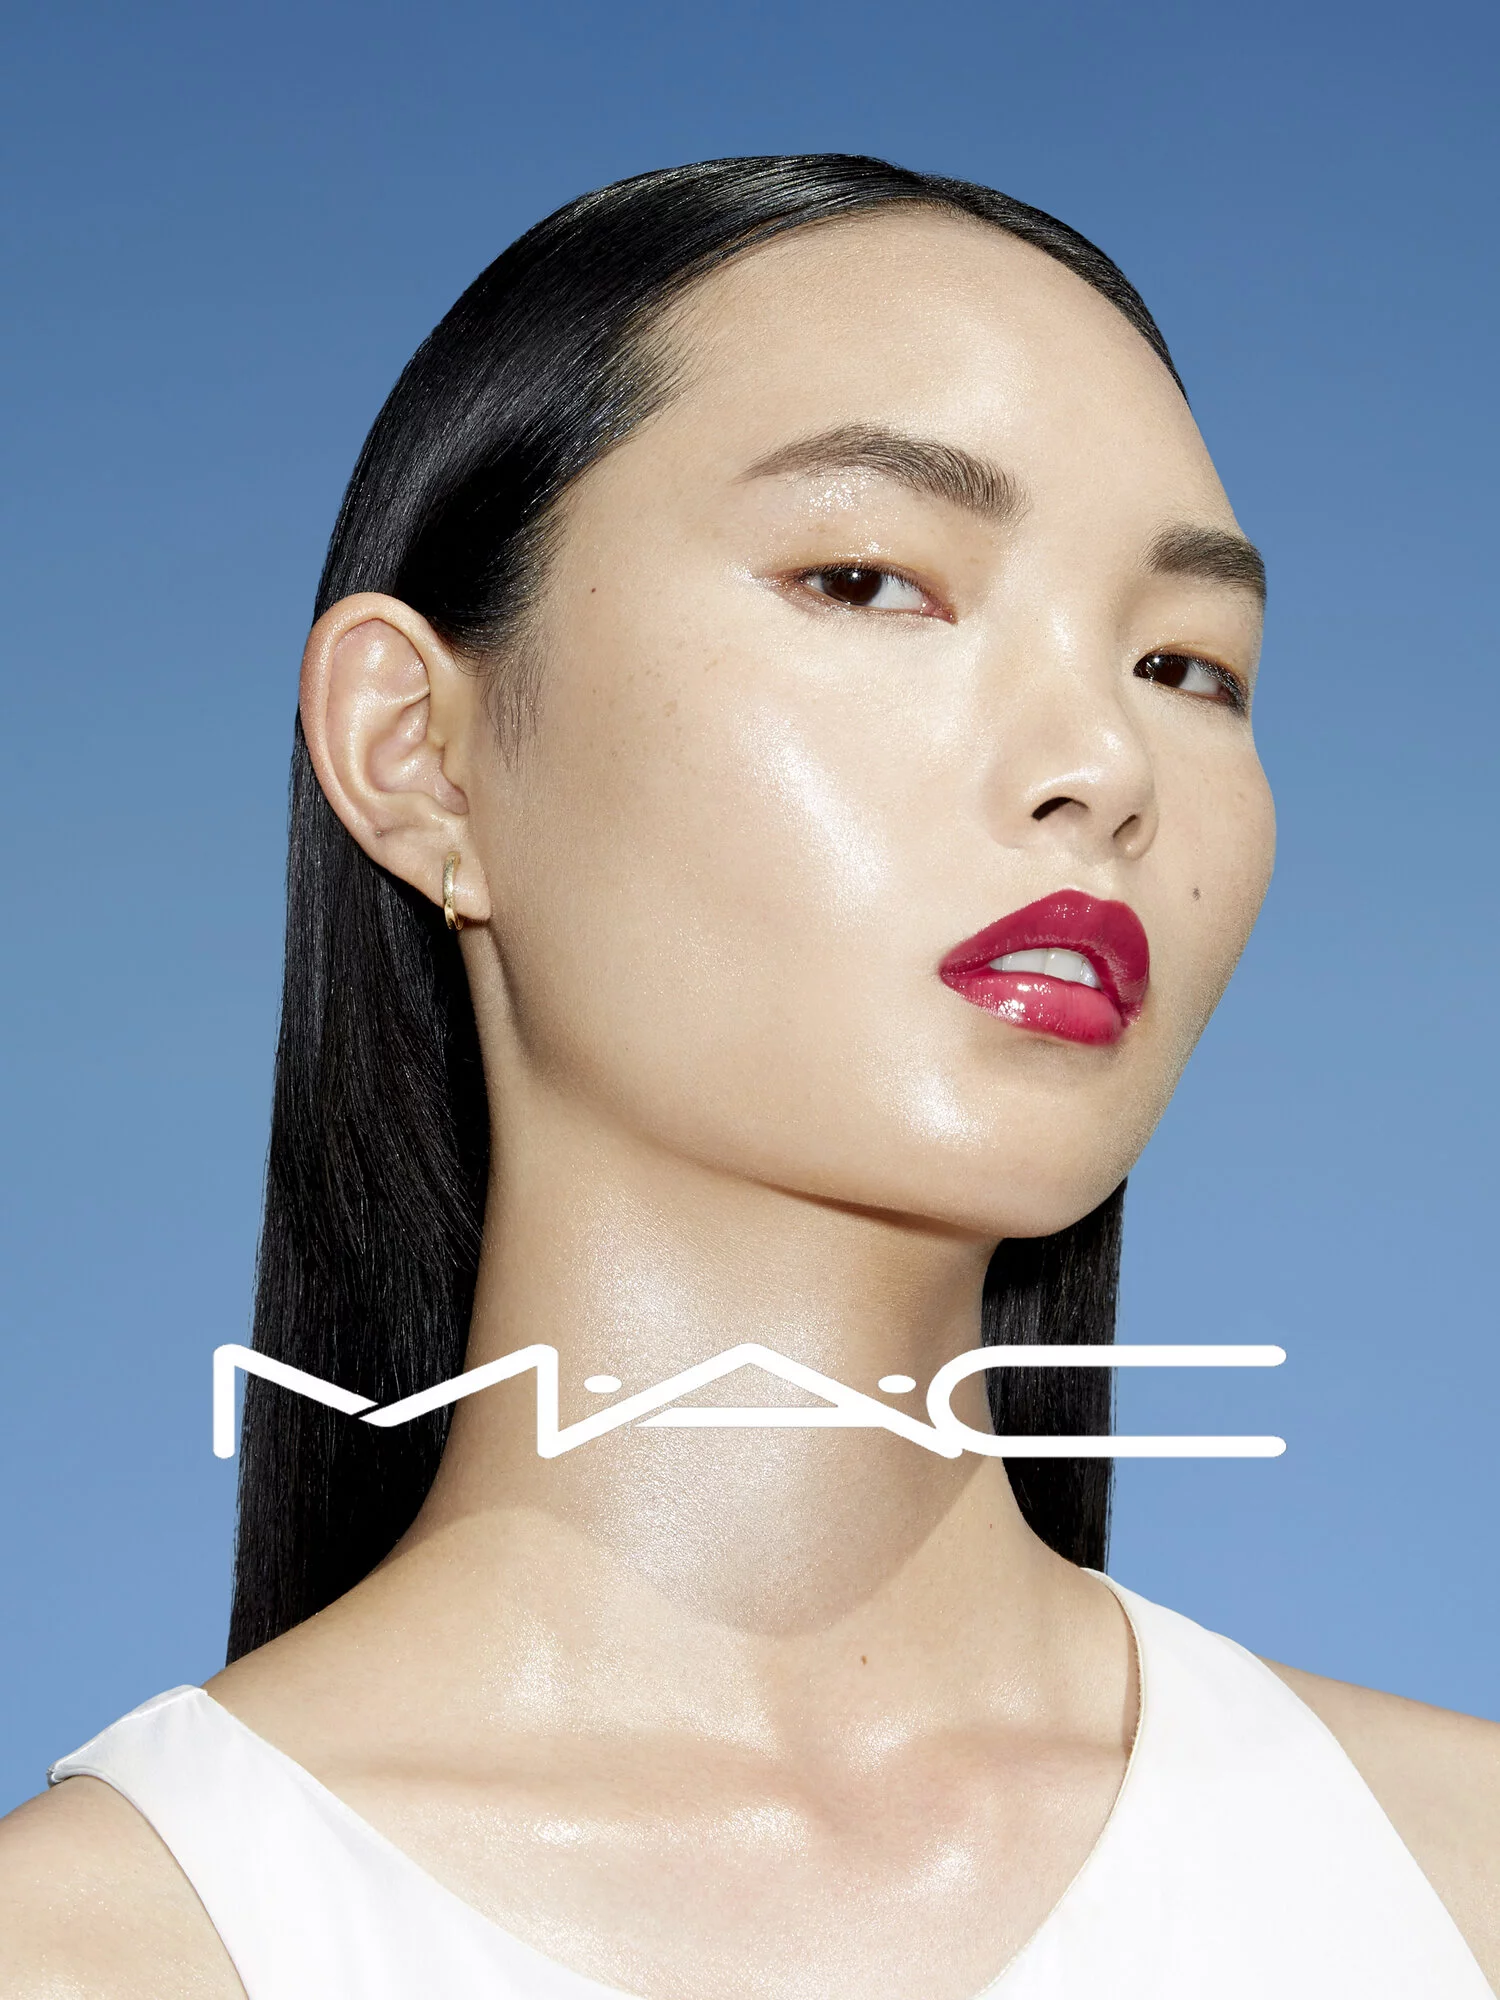 MAC Cosmetics 4 by Claire ROTHSTEIN